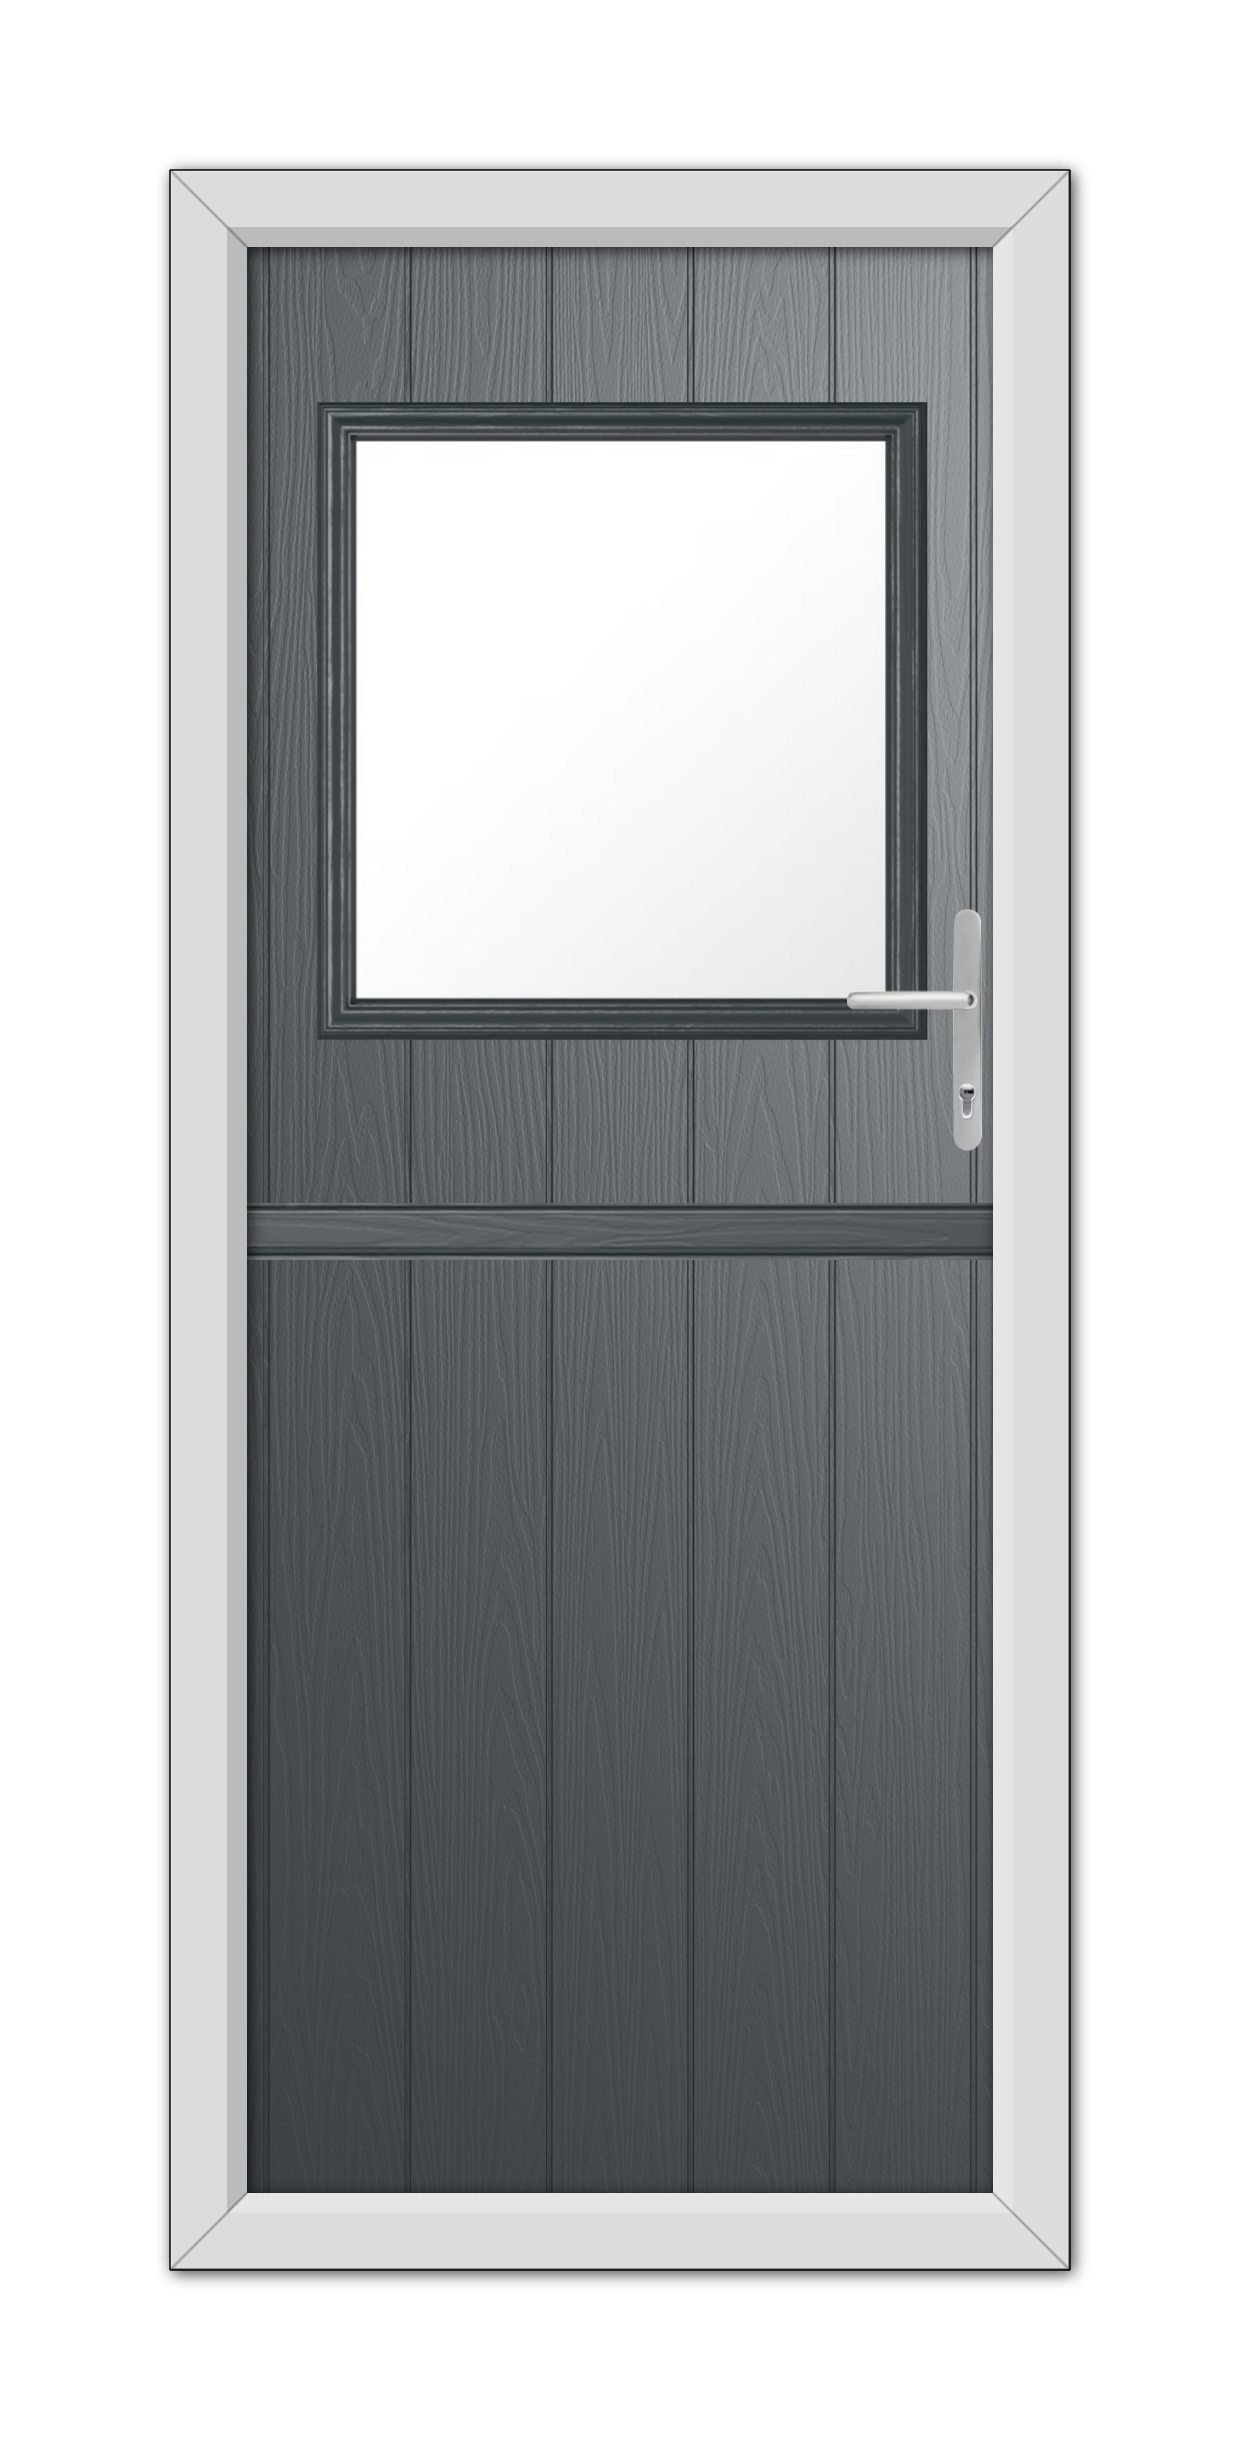 A modern Anthracite Grey Fife Stable Composite Door 48mm Timber Core with a white frame, featuring a small horizontal window at the upper half and a handle on the right side.